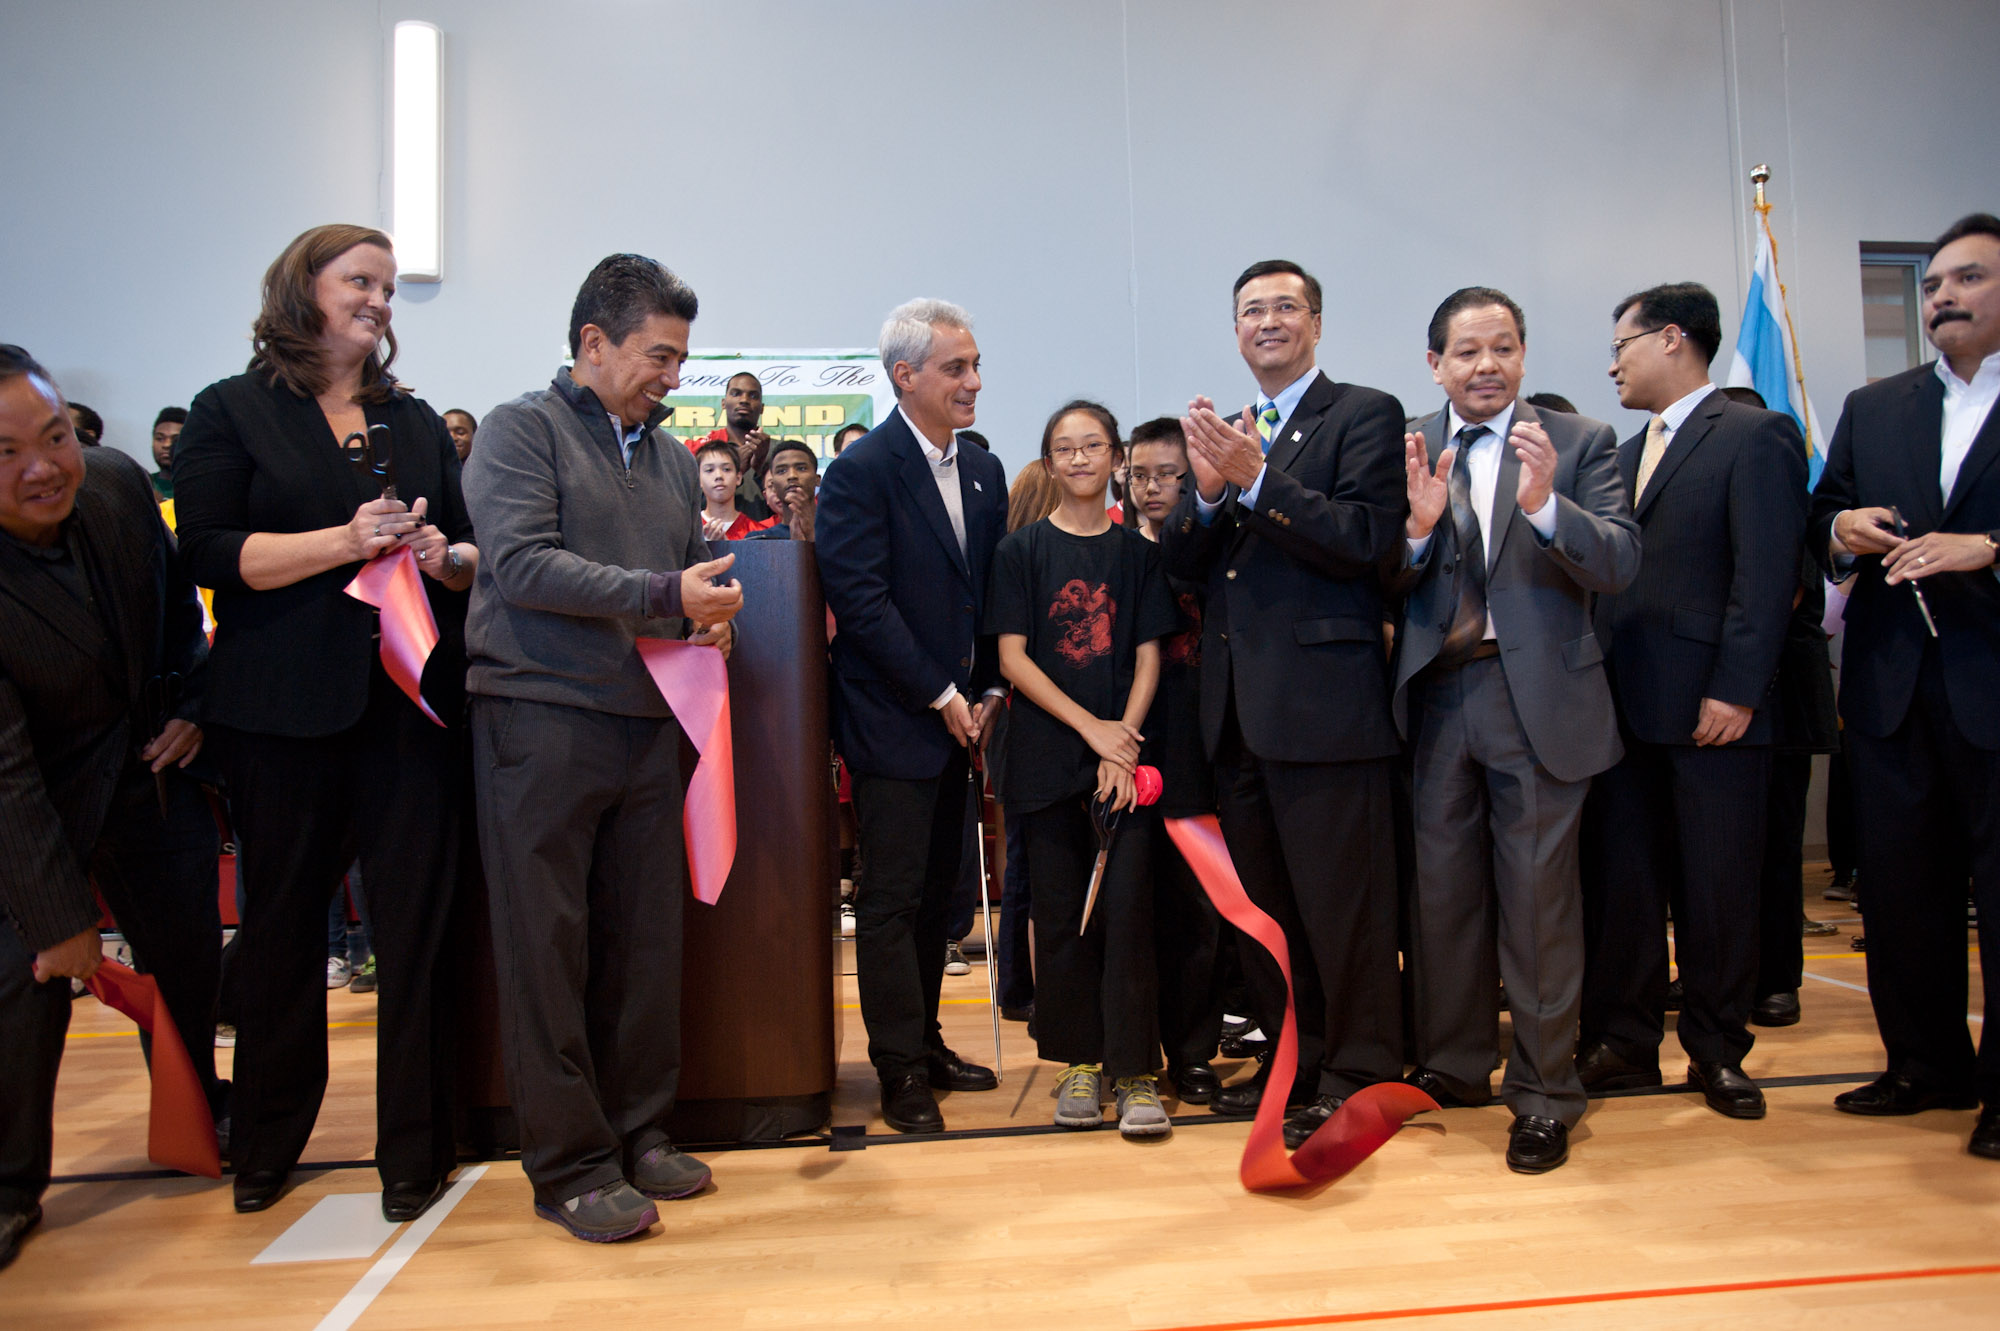 Mayor Rahm Emanuel, Alderman Danny Solis and members of the Chinatown and South Loop communities gathered today to celebrate the opening of the new fieldhouse at Ping Tom Memorial Park.